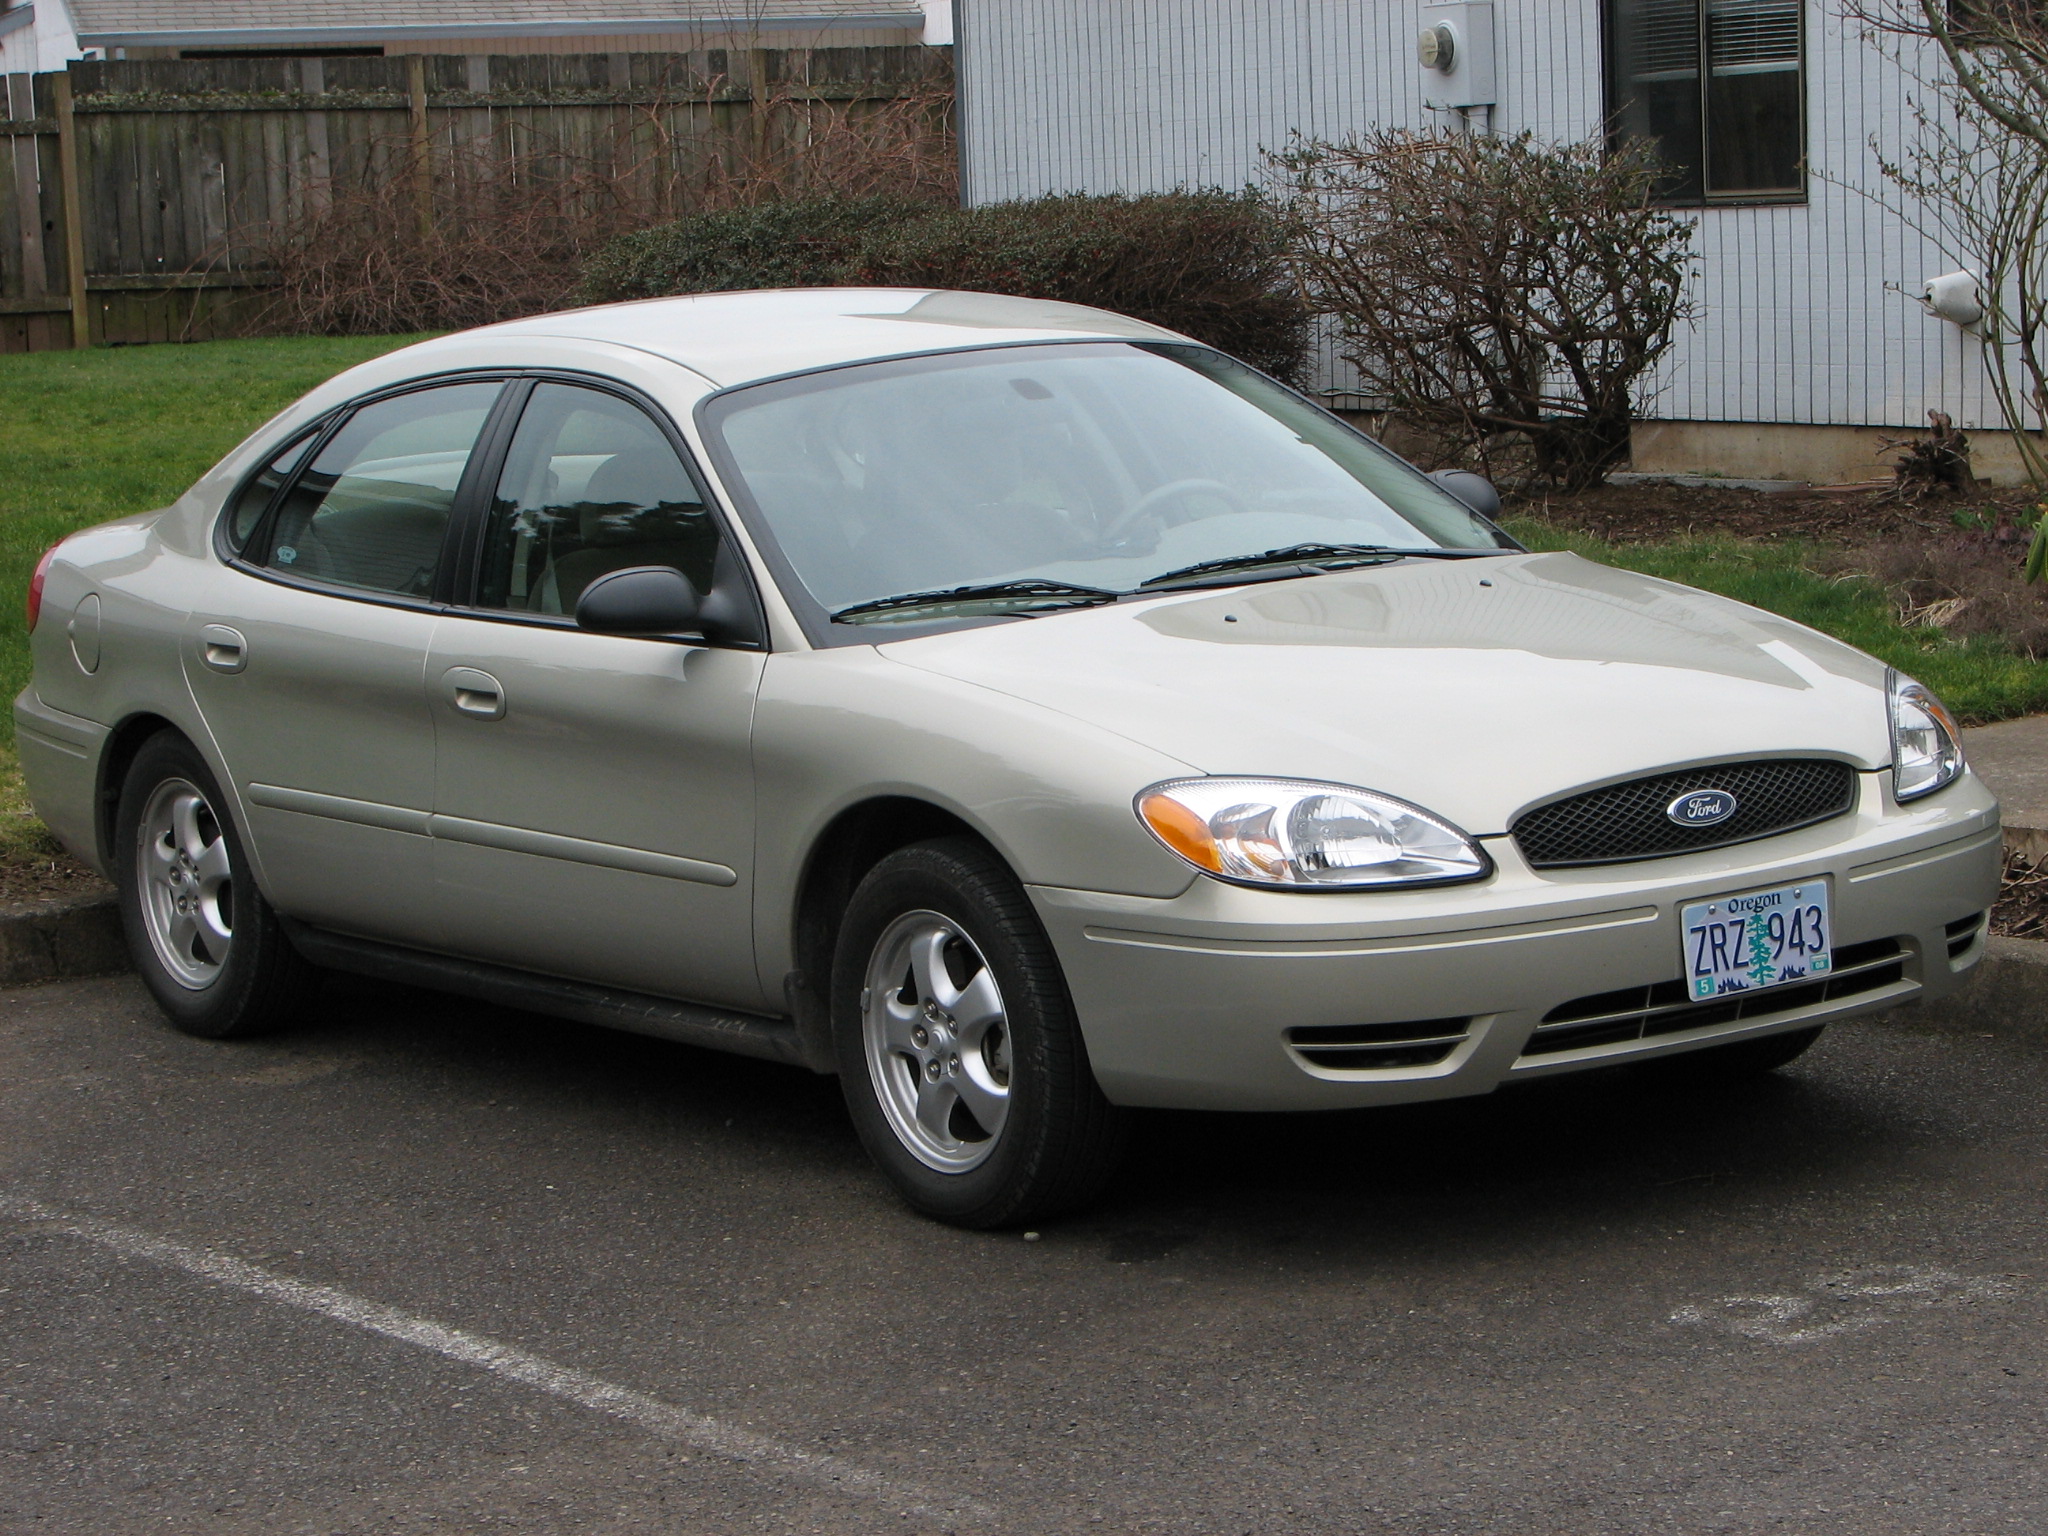 Ford_Taurus_(2005)_(photograph_by_Theo,_2006).jpg